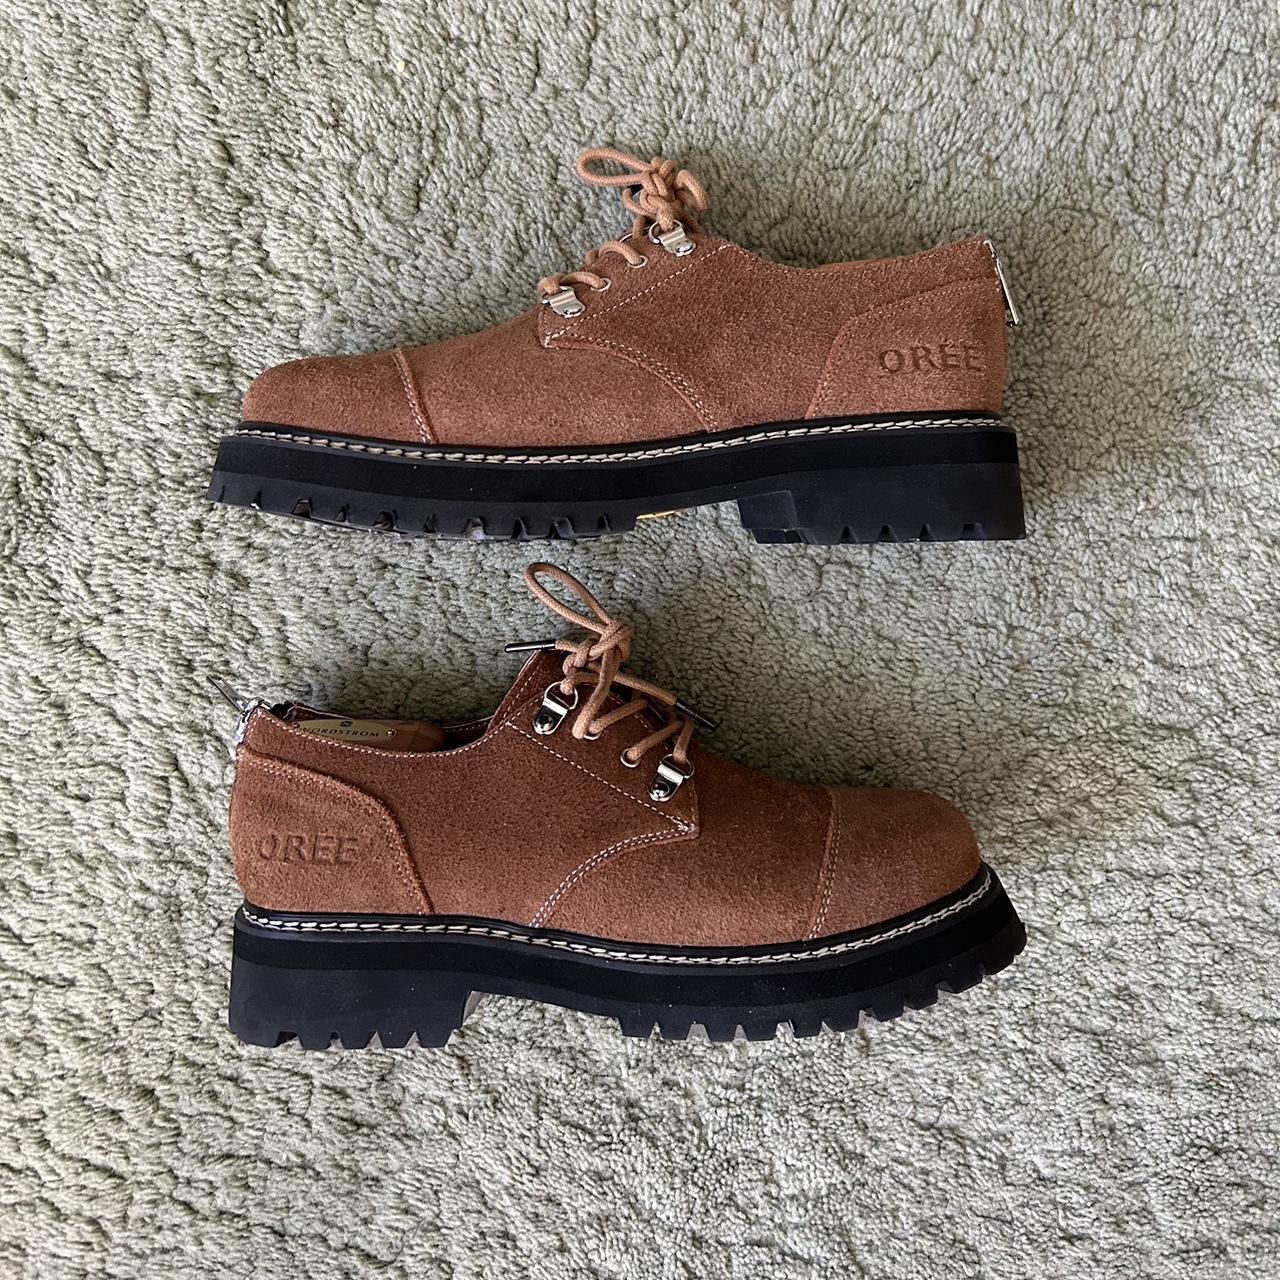 Oree NYC Grant infantry derby shoe Outer is a brown... - Depop